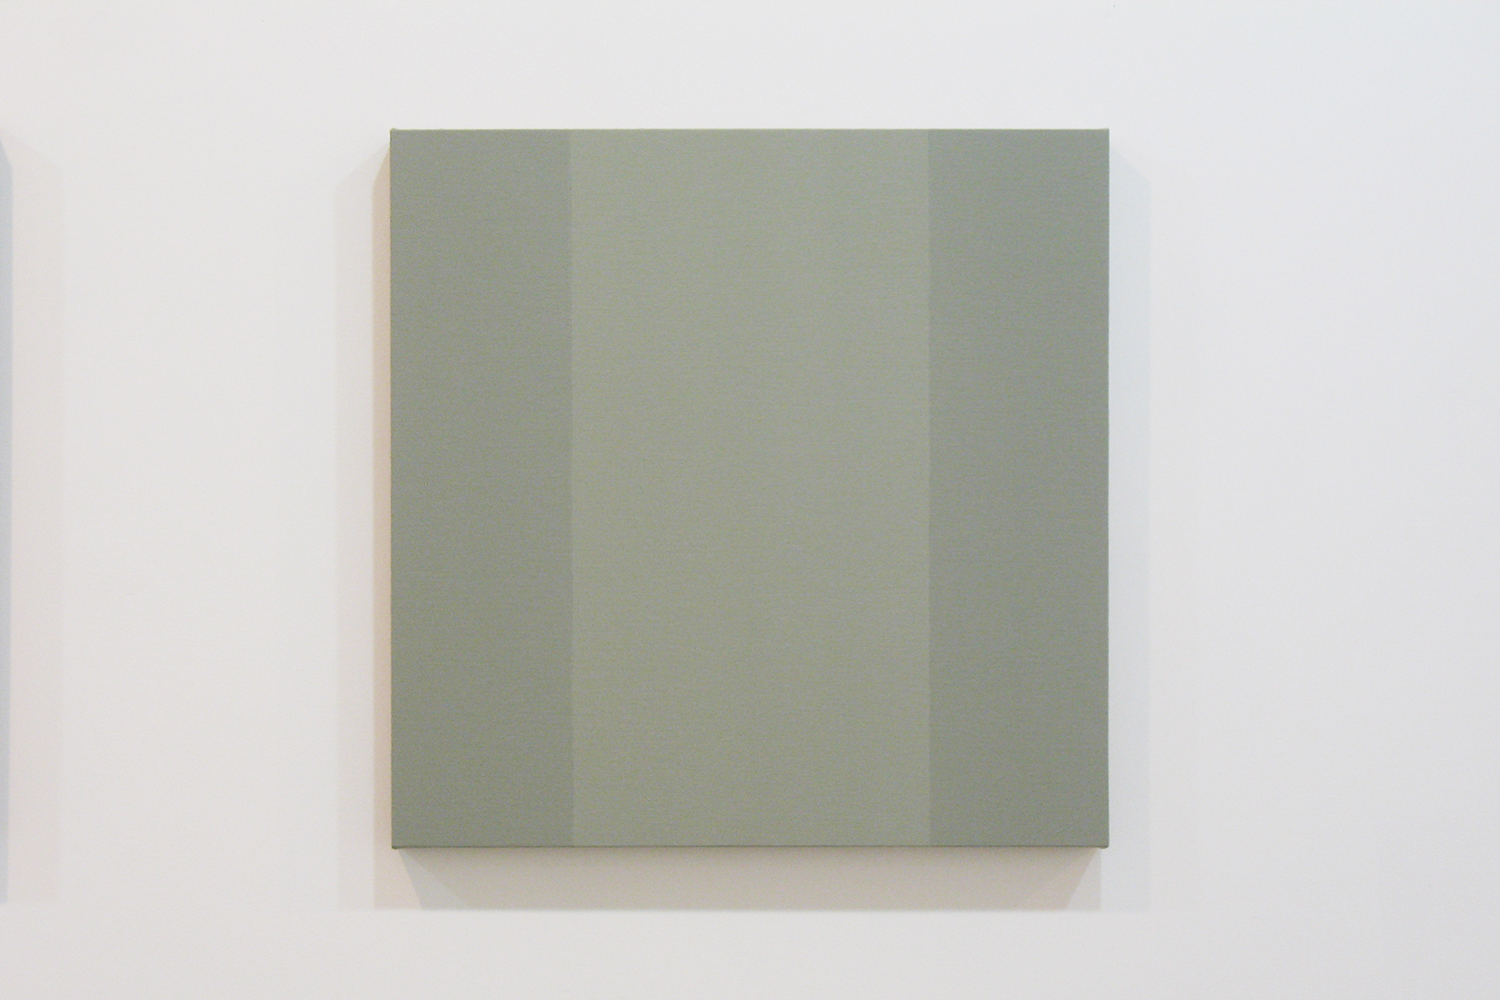 TS0904｜Gesso on linen on panel｜45 x 45 cm｜2009